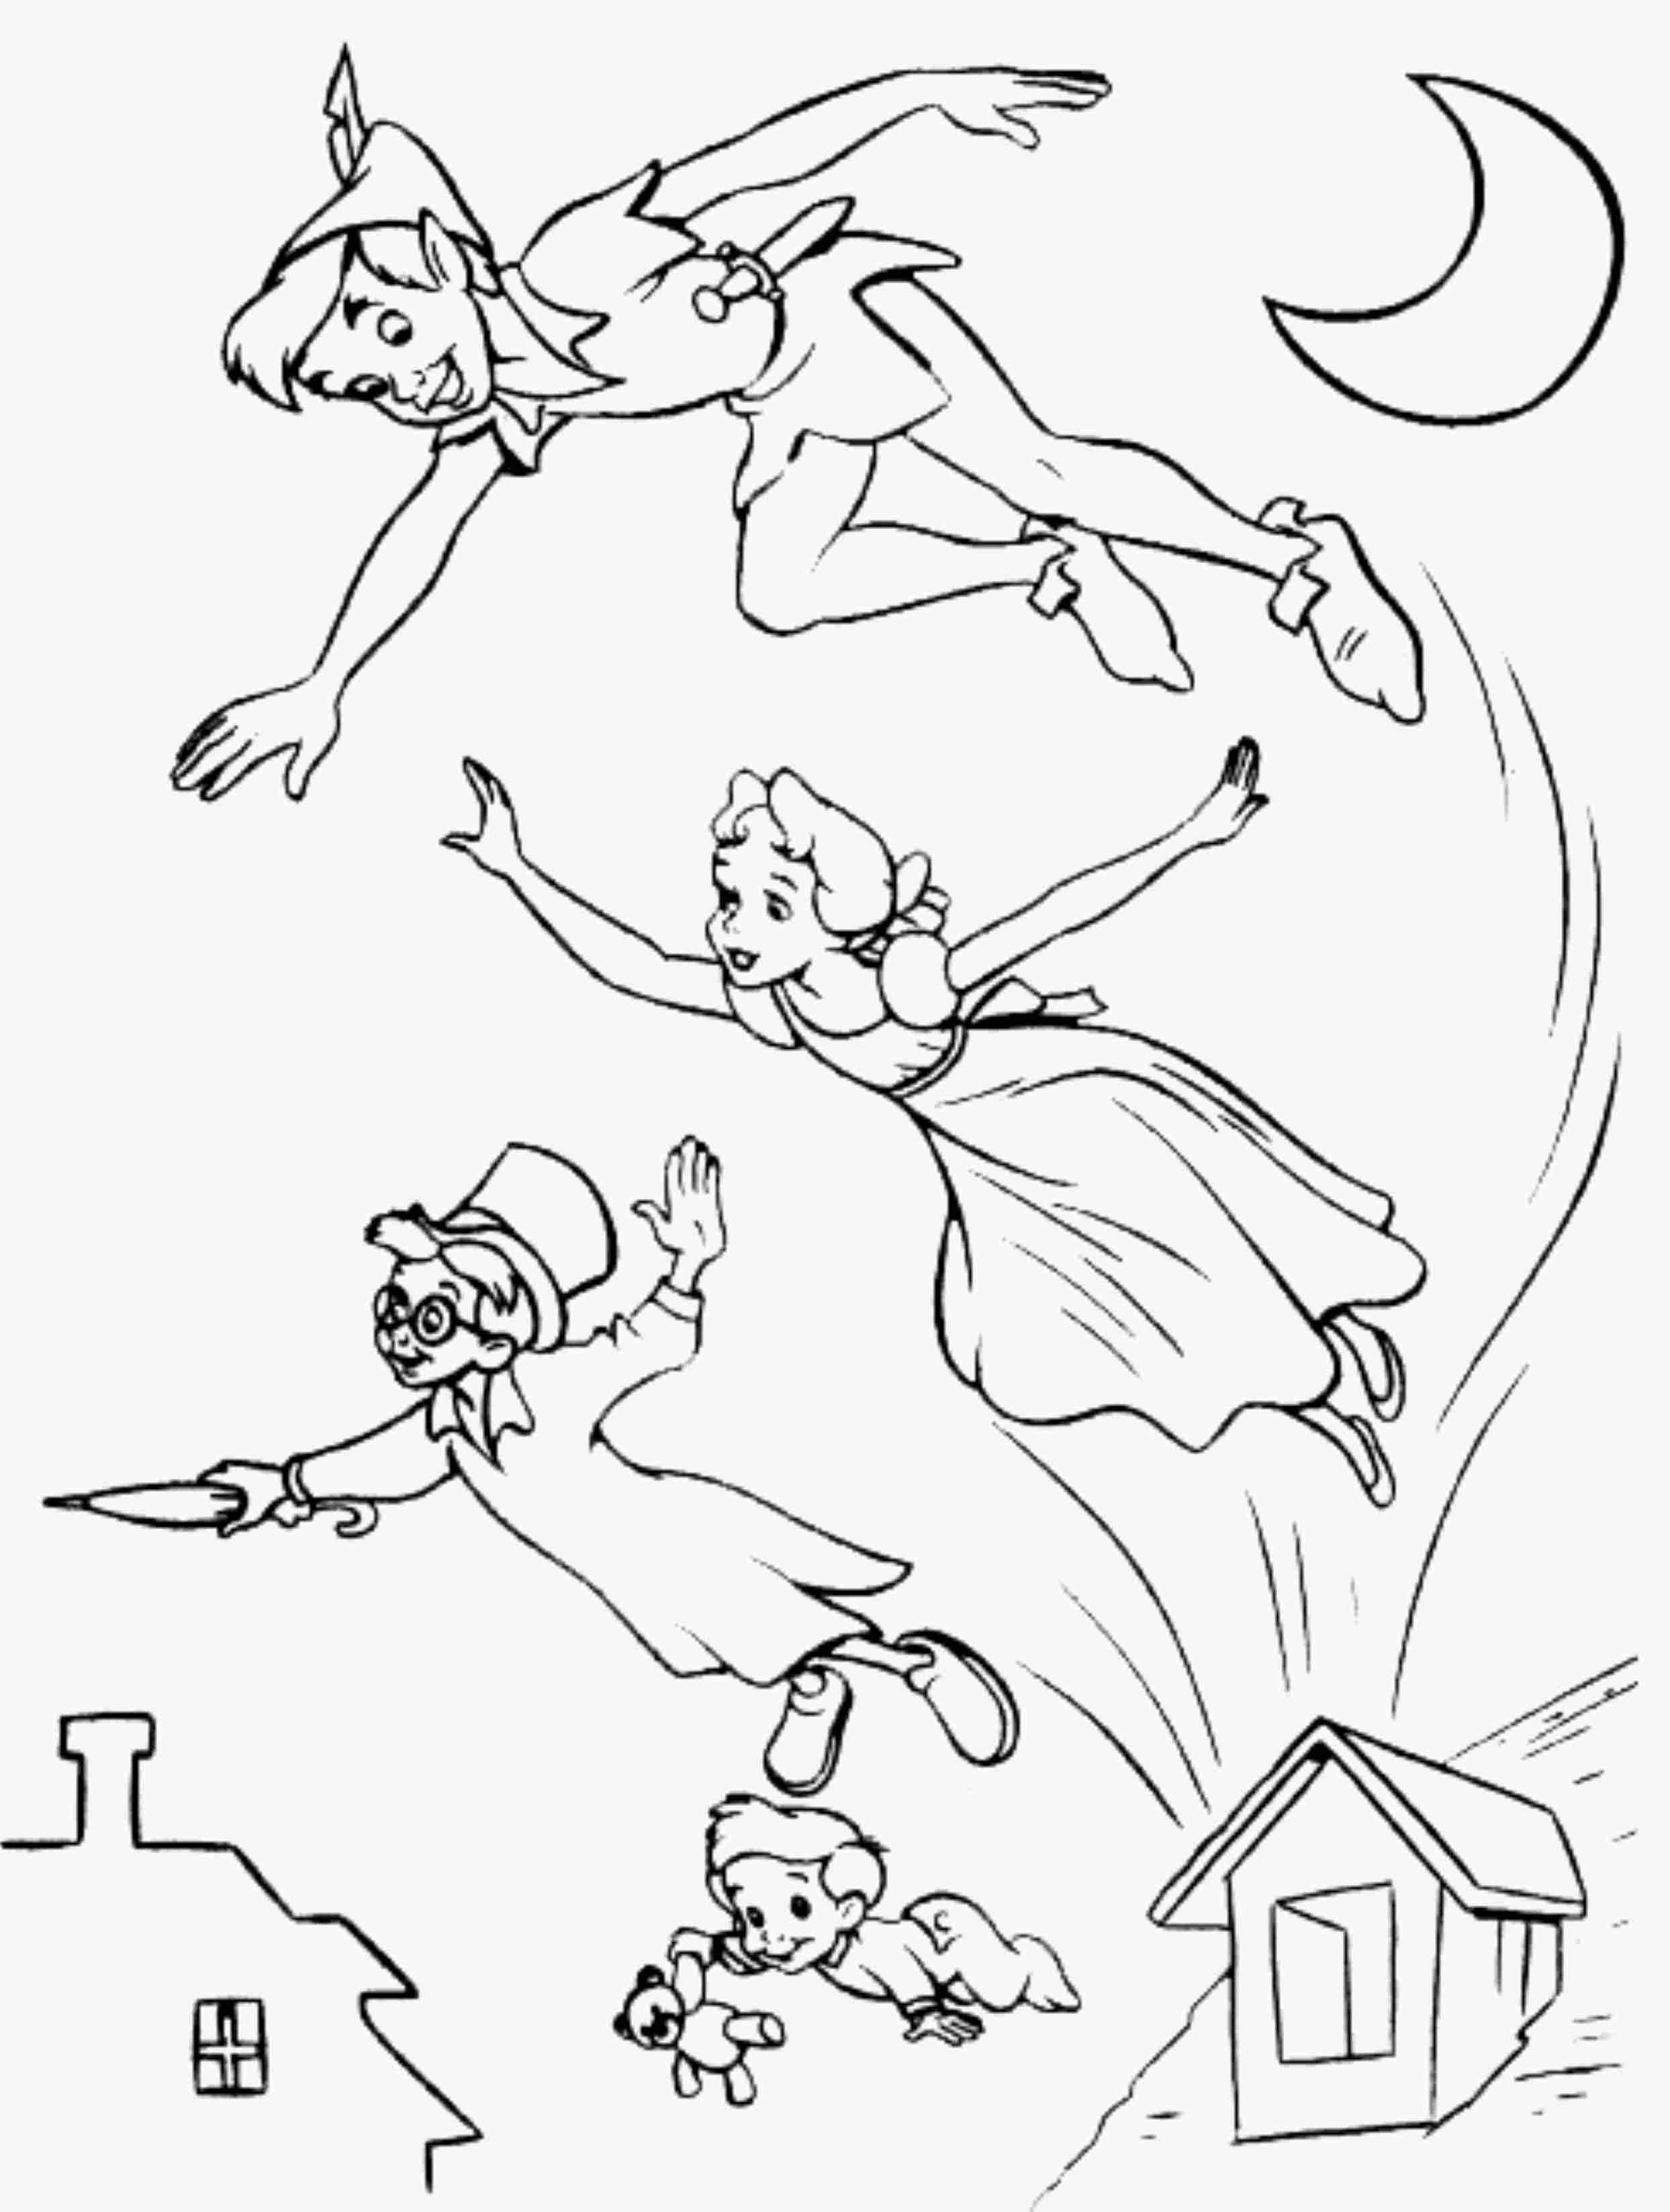 Coloring pages peter pan coloring pages online download free printable